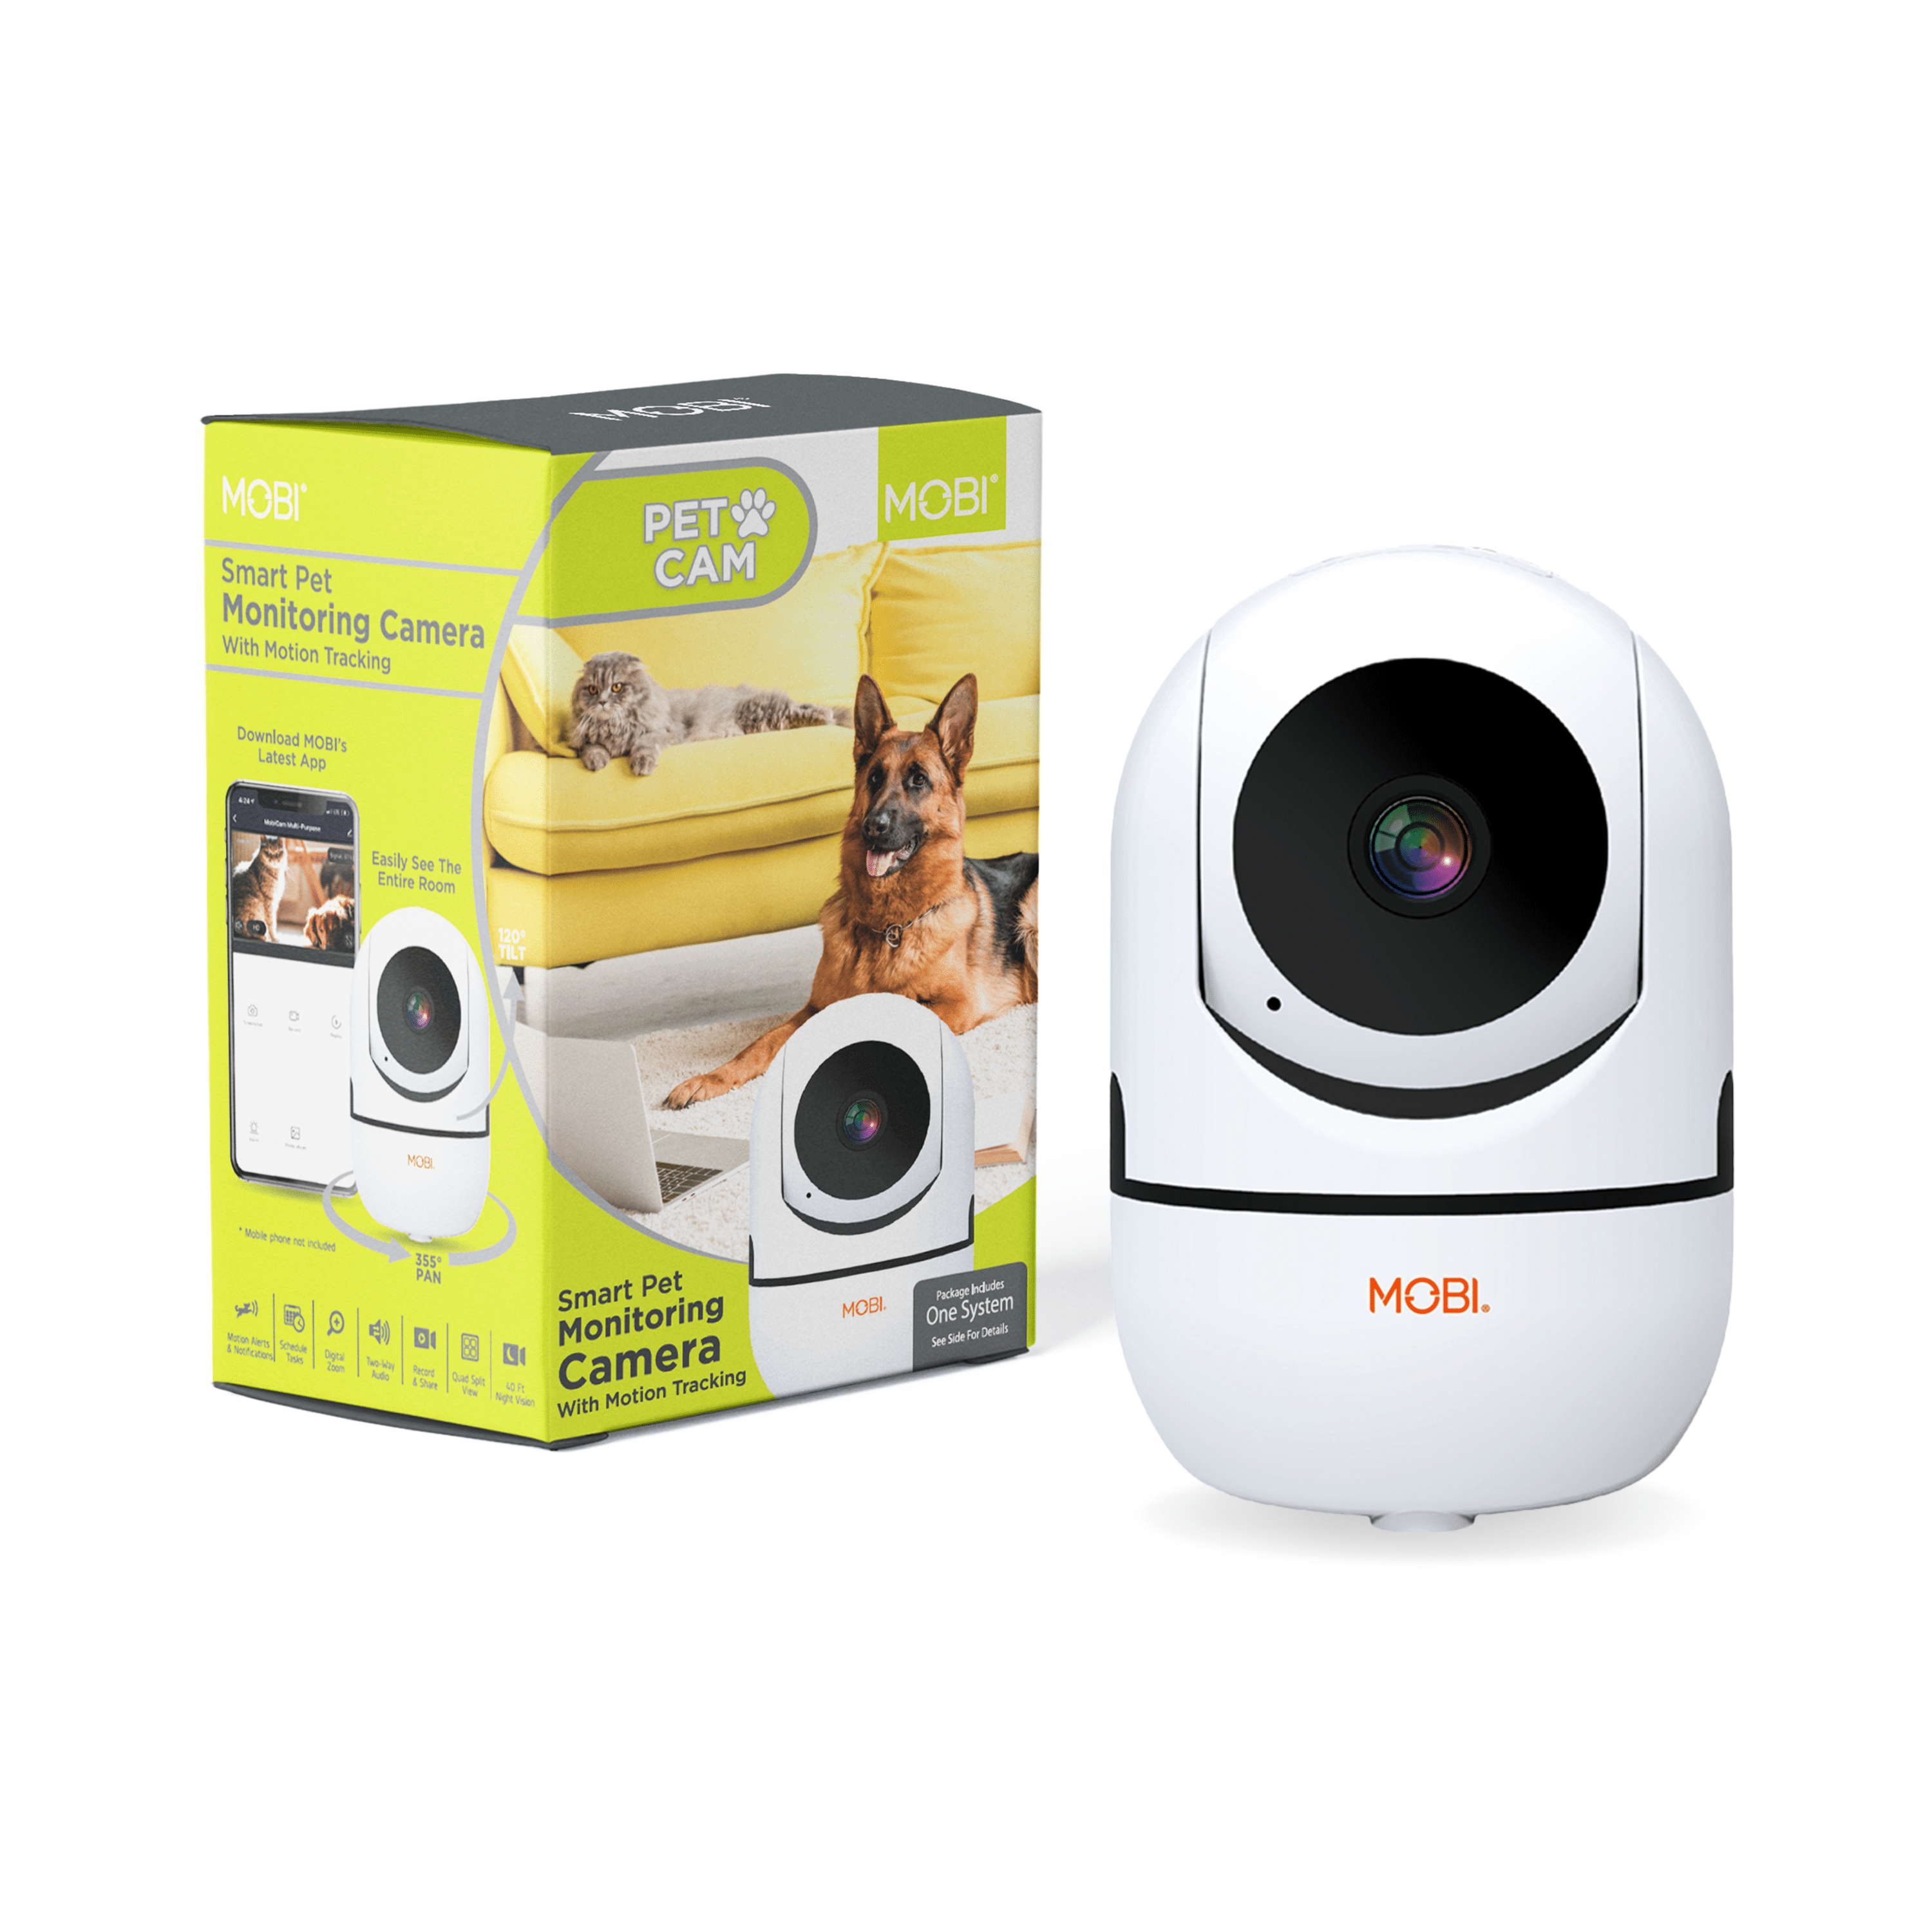 This adorable motion-tracking camera has proven to be indispensable in my  smart home